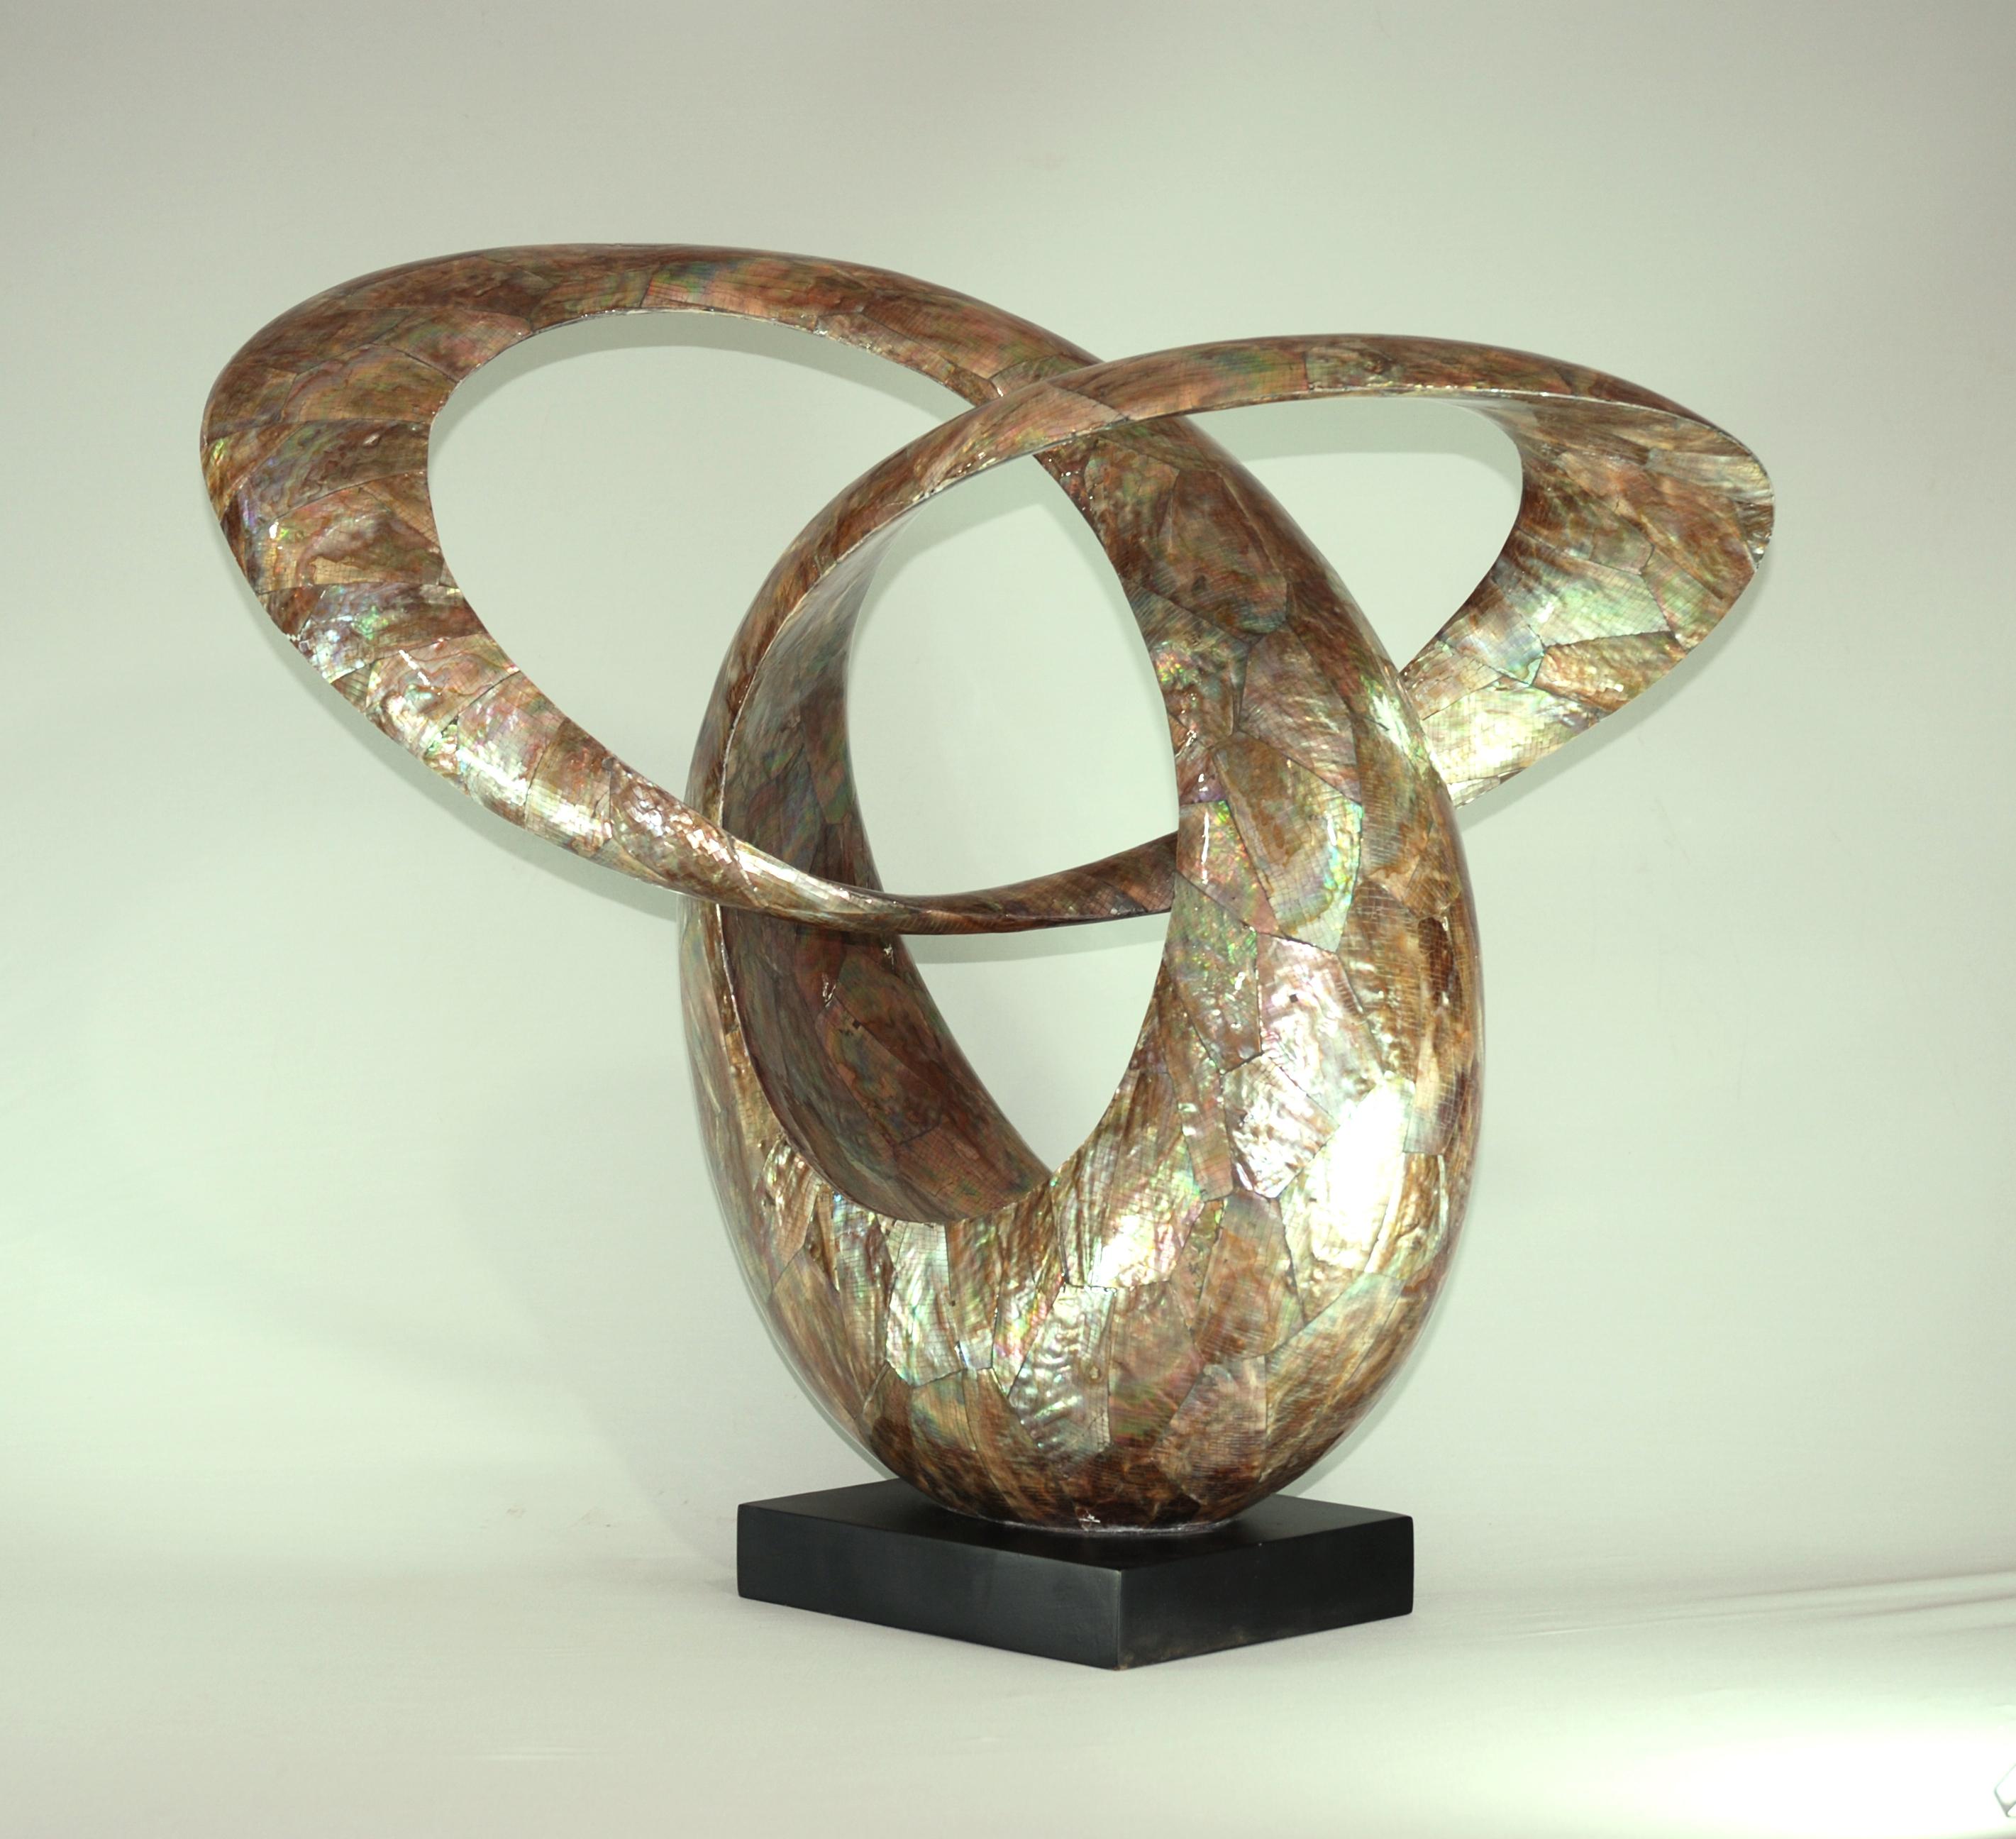 Mother of pearl abstract sculpture made in Vietnam